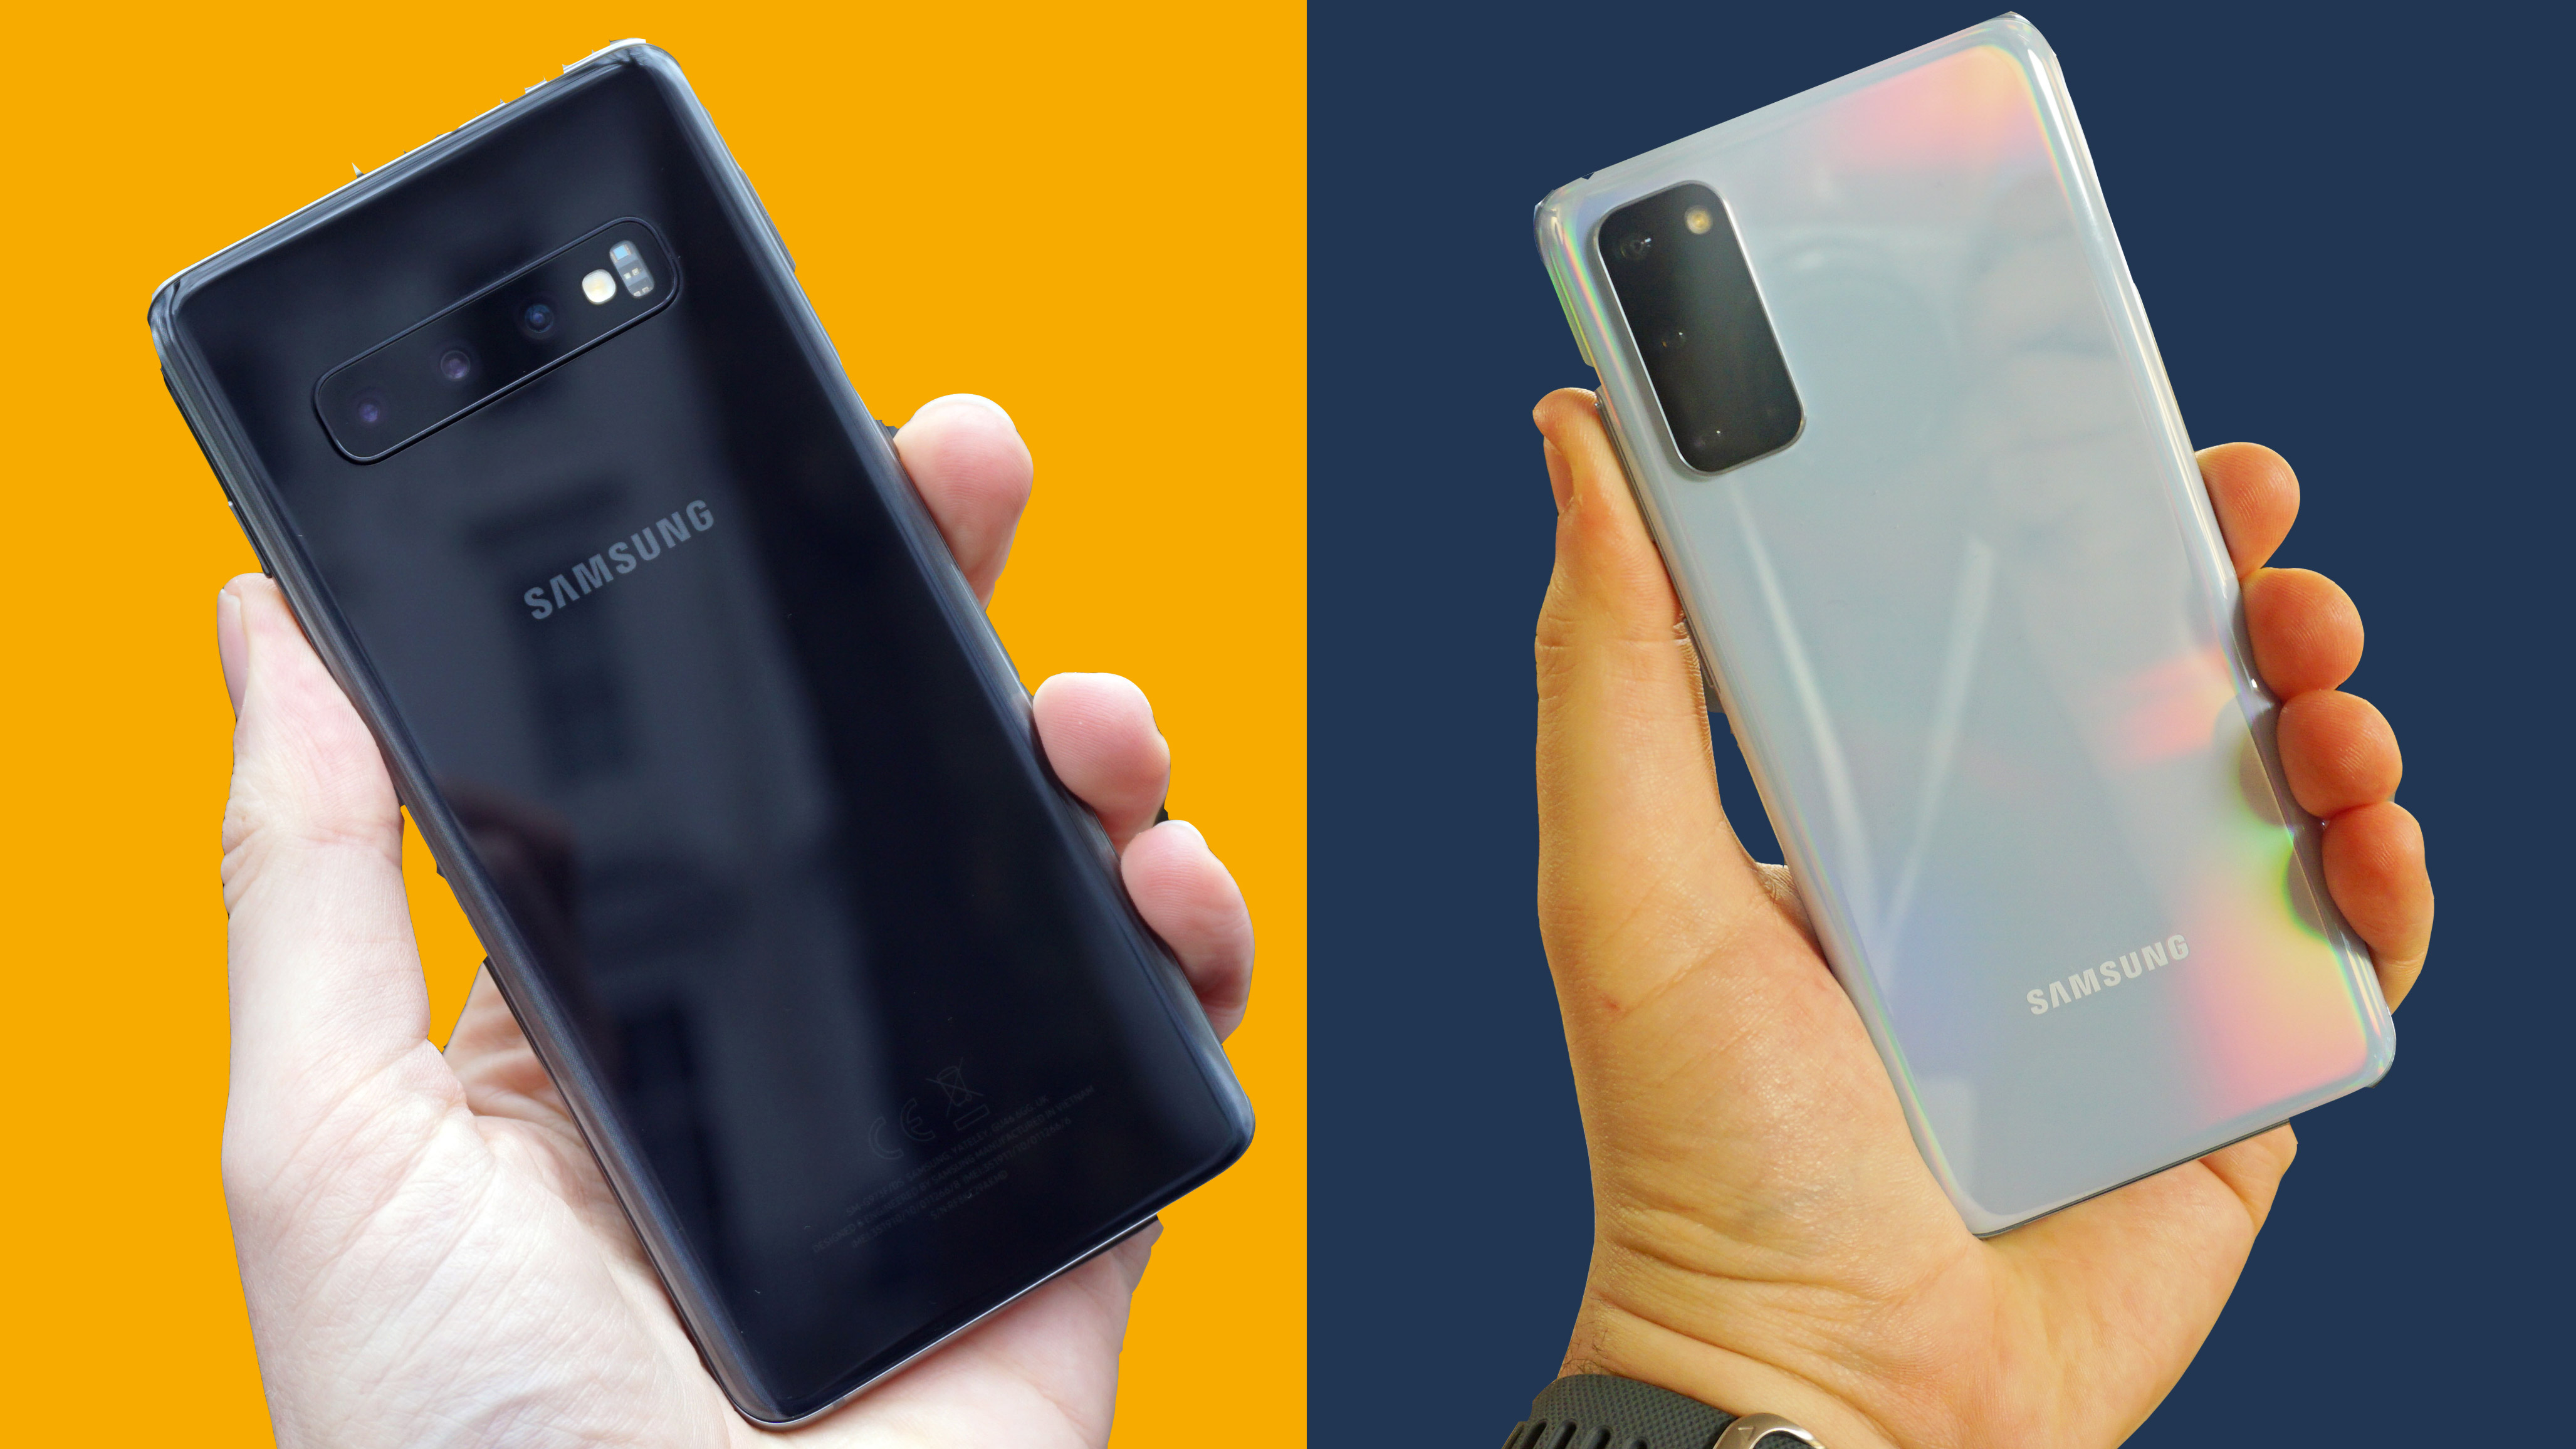 Samsung Galaxy S Vs Galaxy S10 Comparing Samsung S New And Old Flagships Techradar